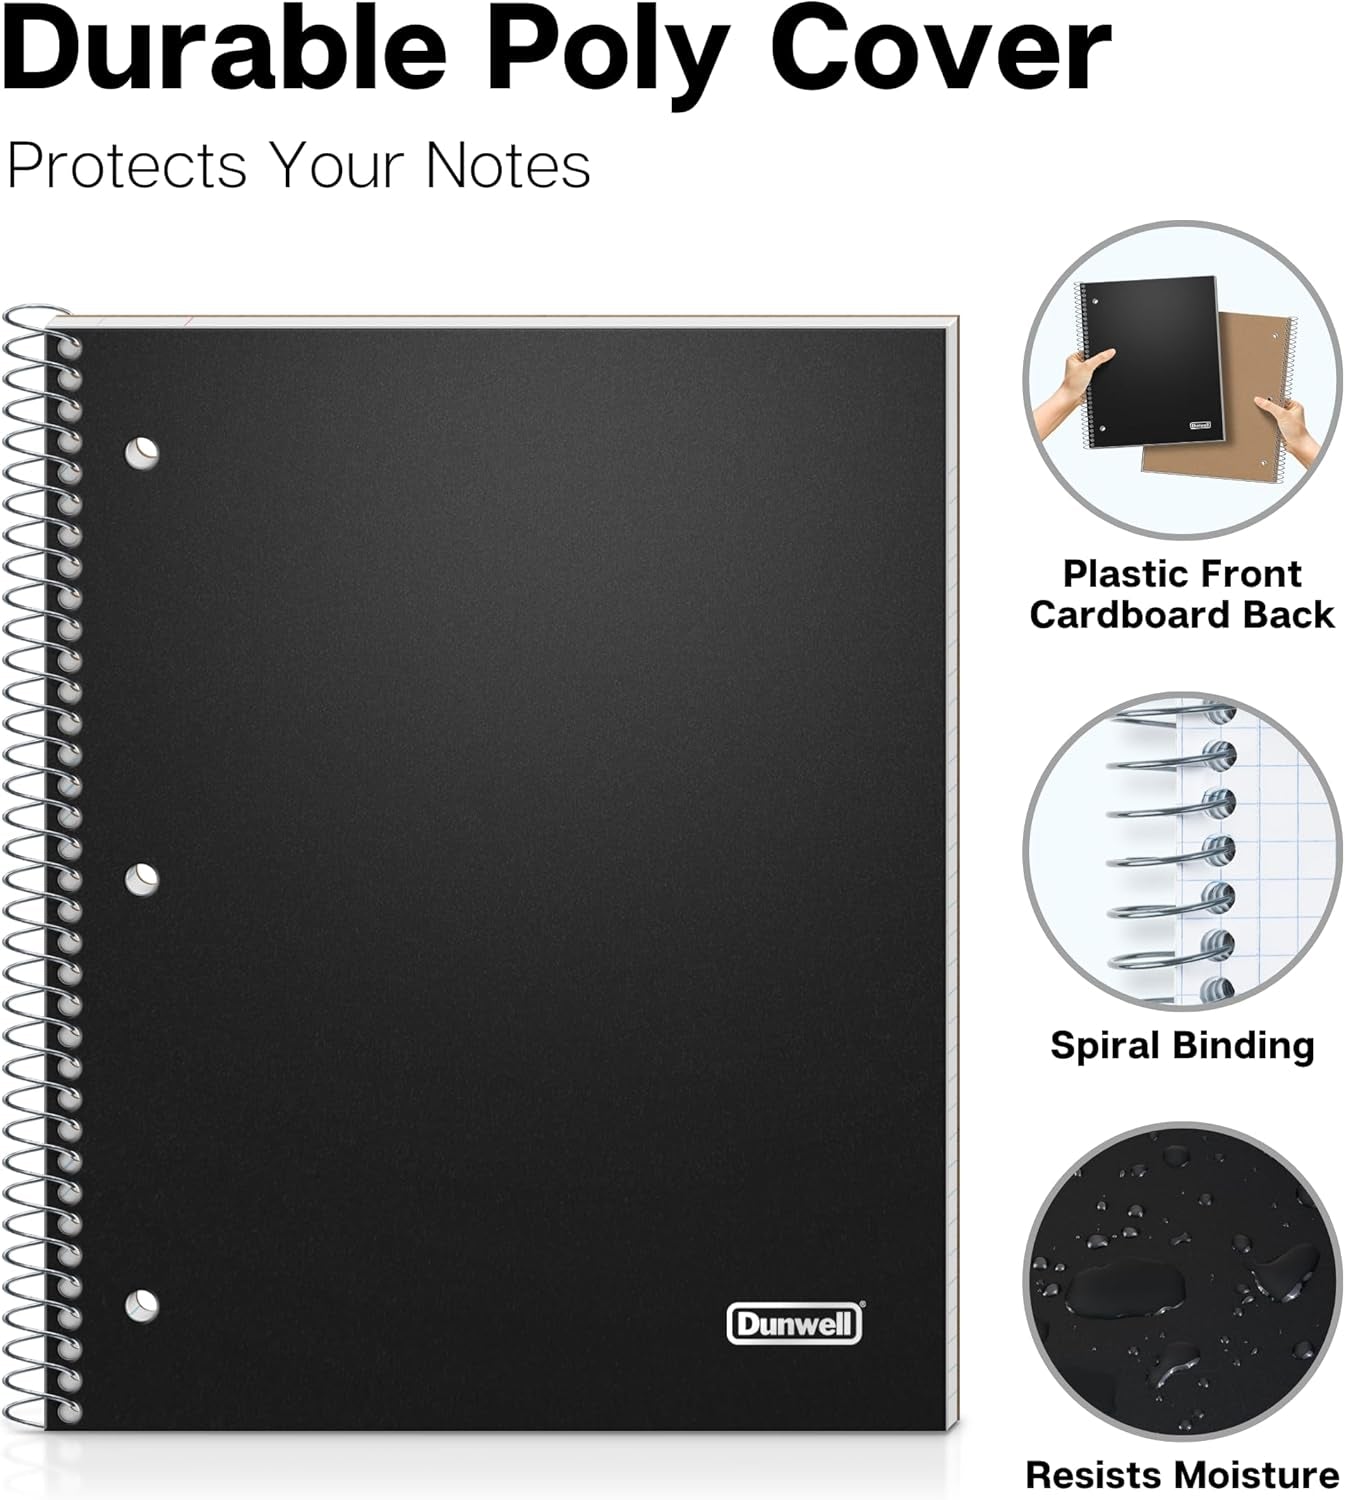 1 Subject Spiral Notebook 8.5 X 11 – Black Plastic Cover College Ruled Notebook, 100 Sheets, One Subject Notebook with Perforated Paper, Inner Pockets, Spiral Notebook for School Note Taking